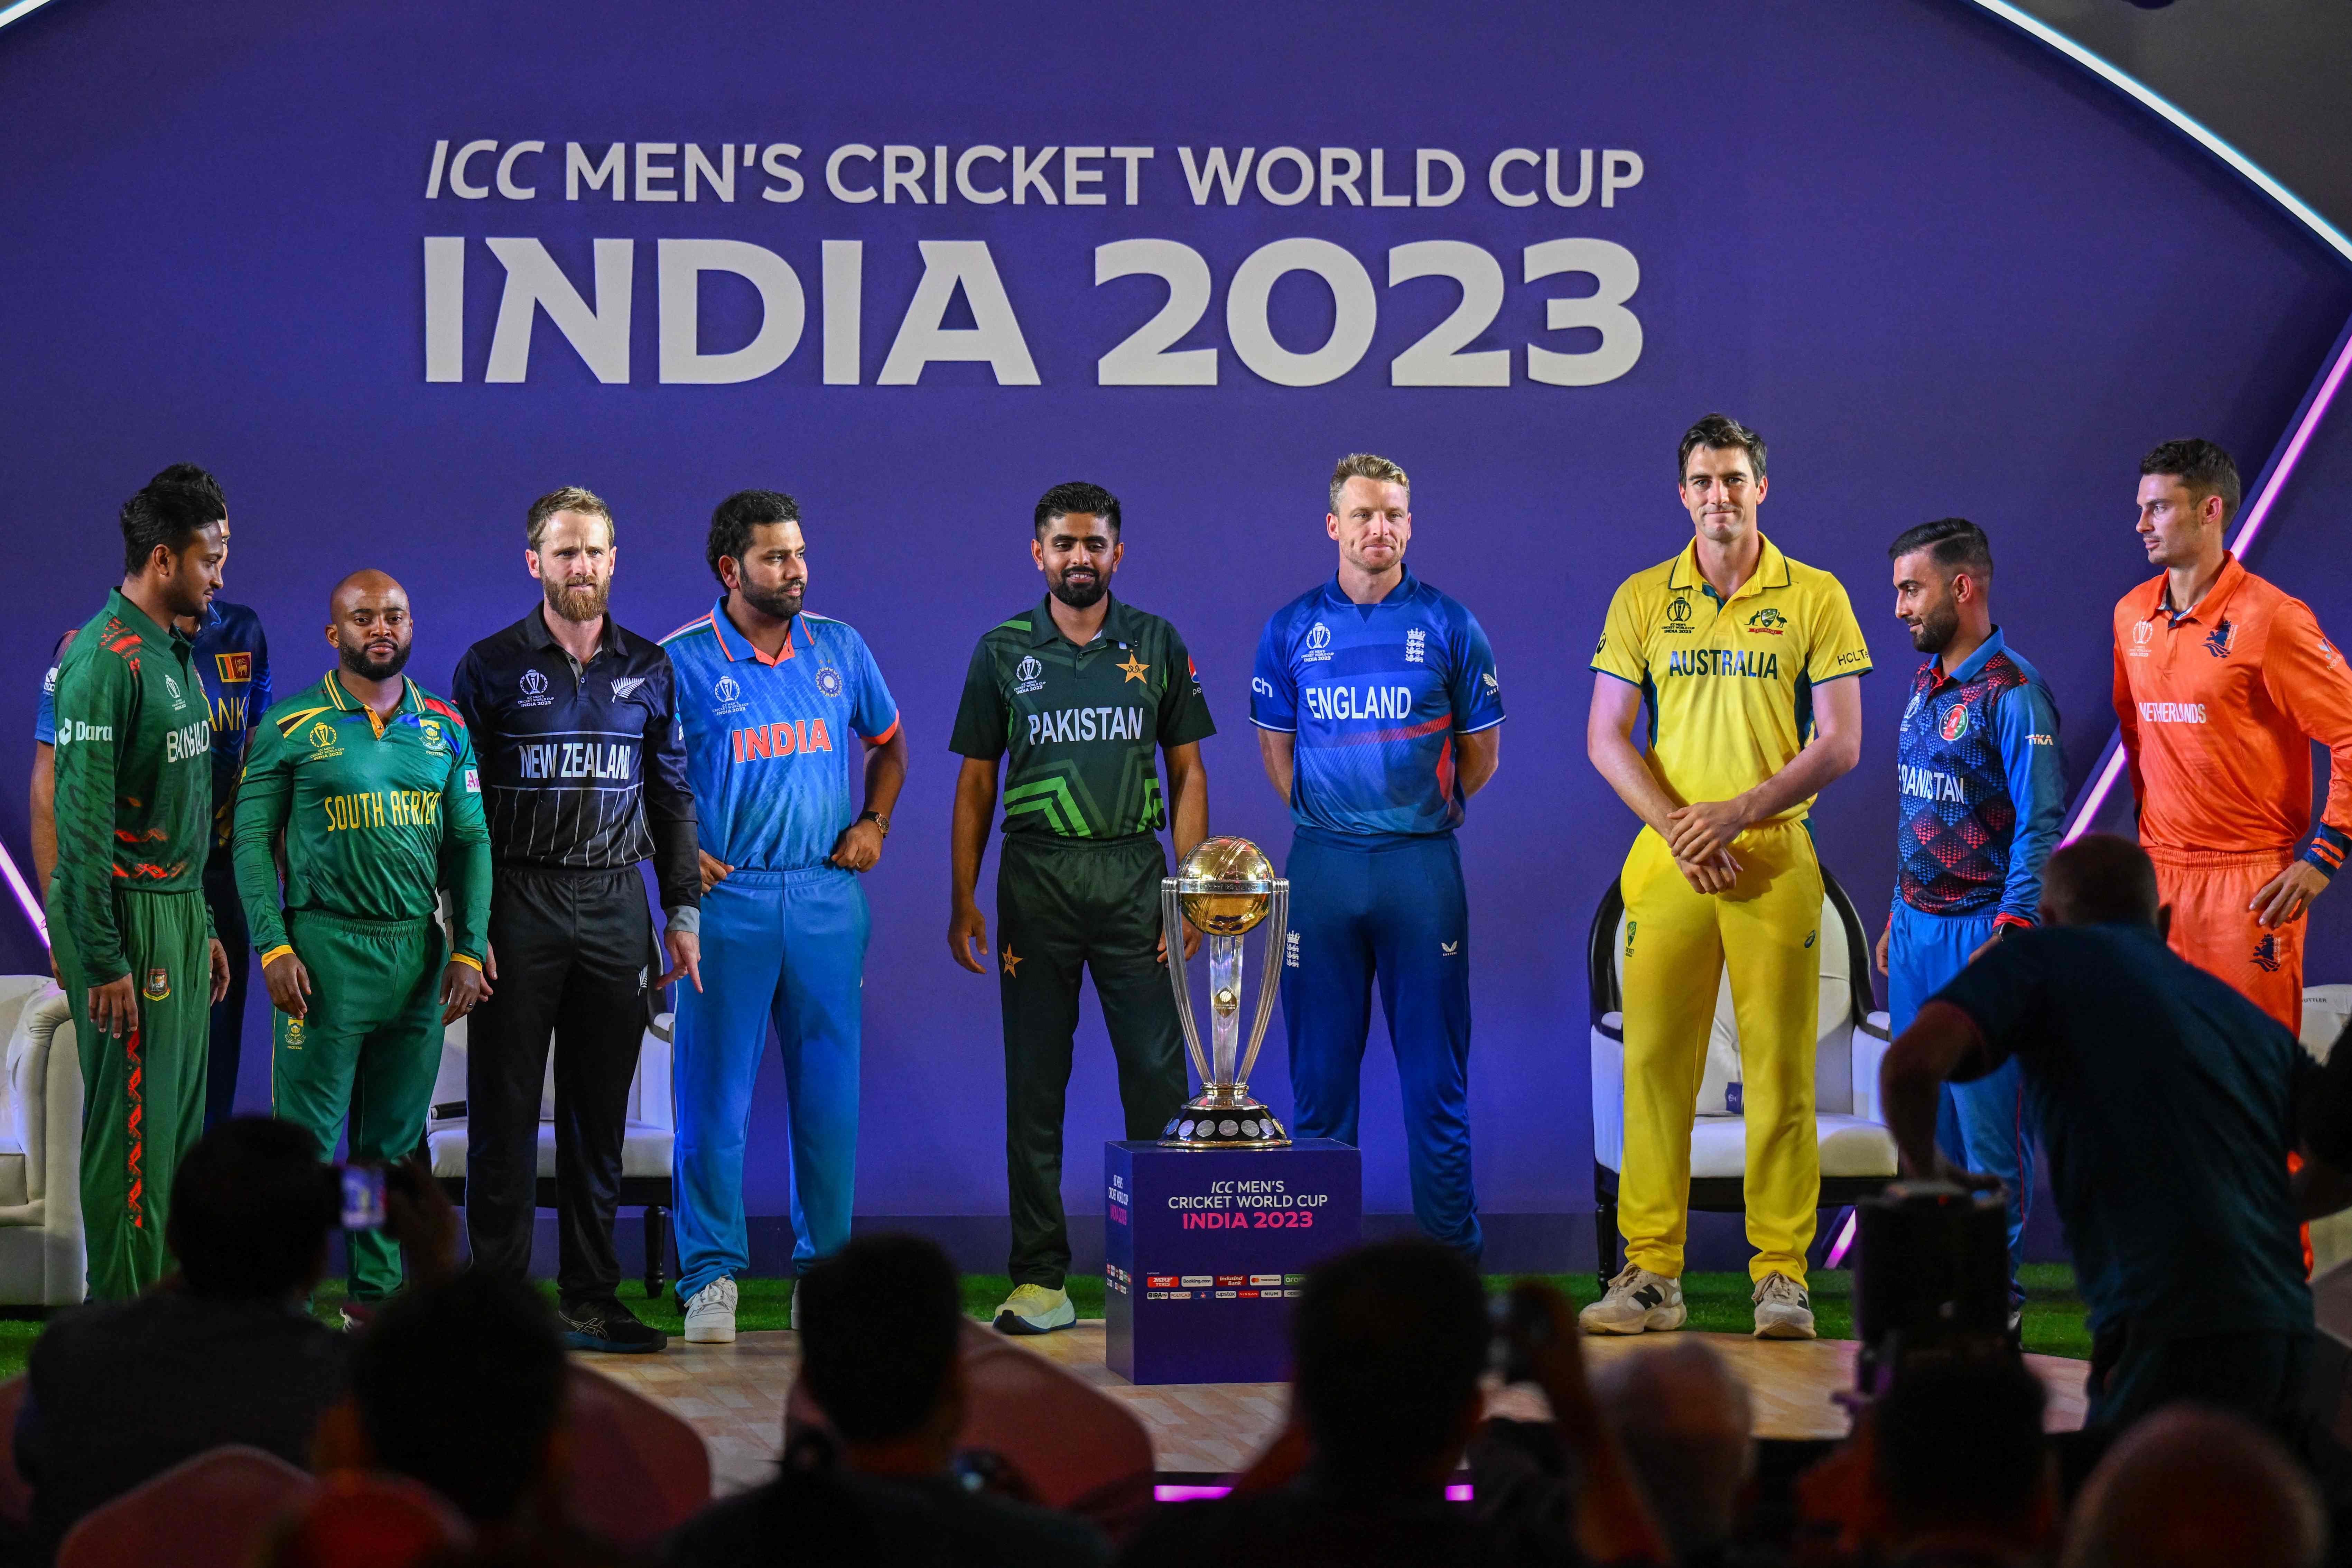 How to watch the Cricket World Cup 2023 online or on TV